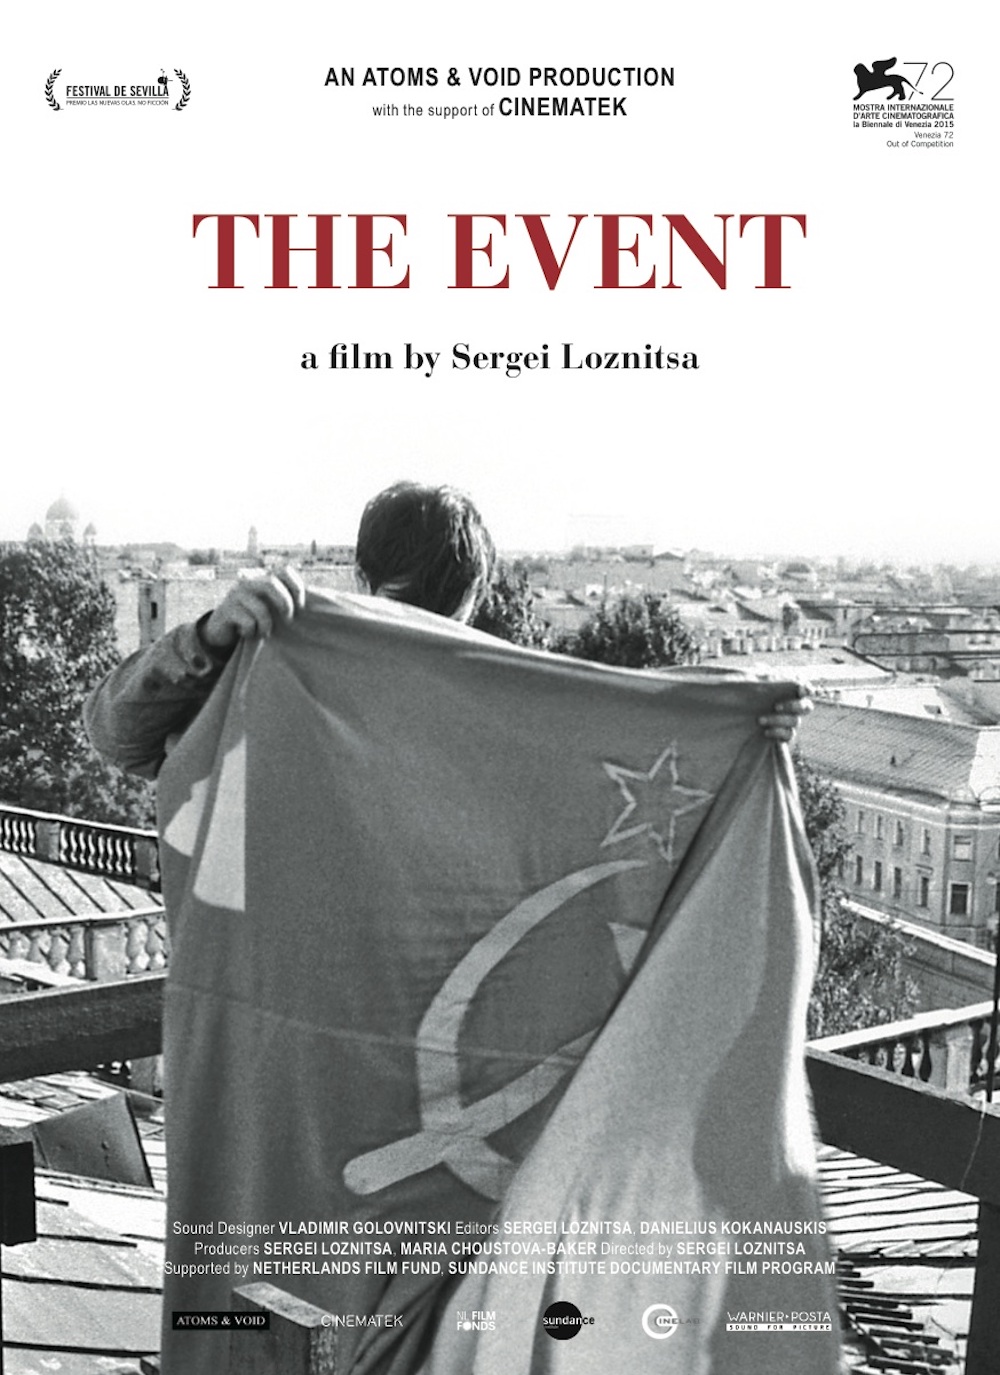 Poster for Sergei Loznitsa's The Event (2015)